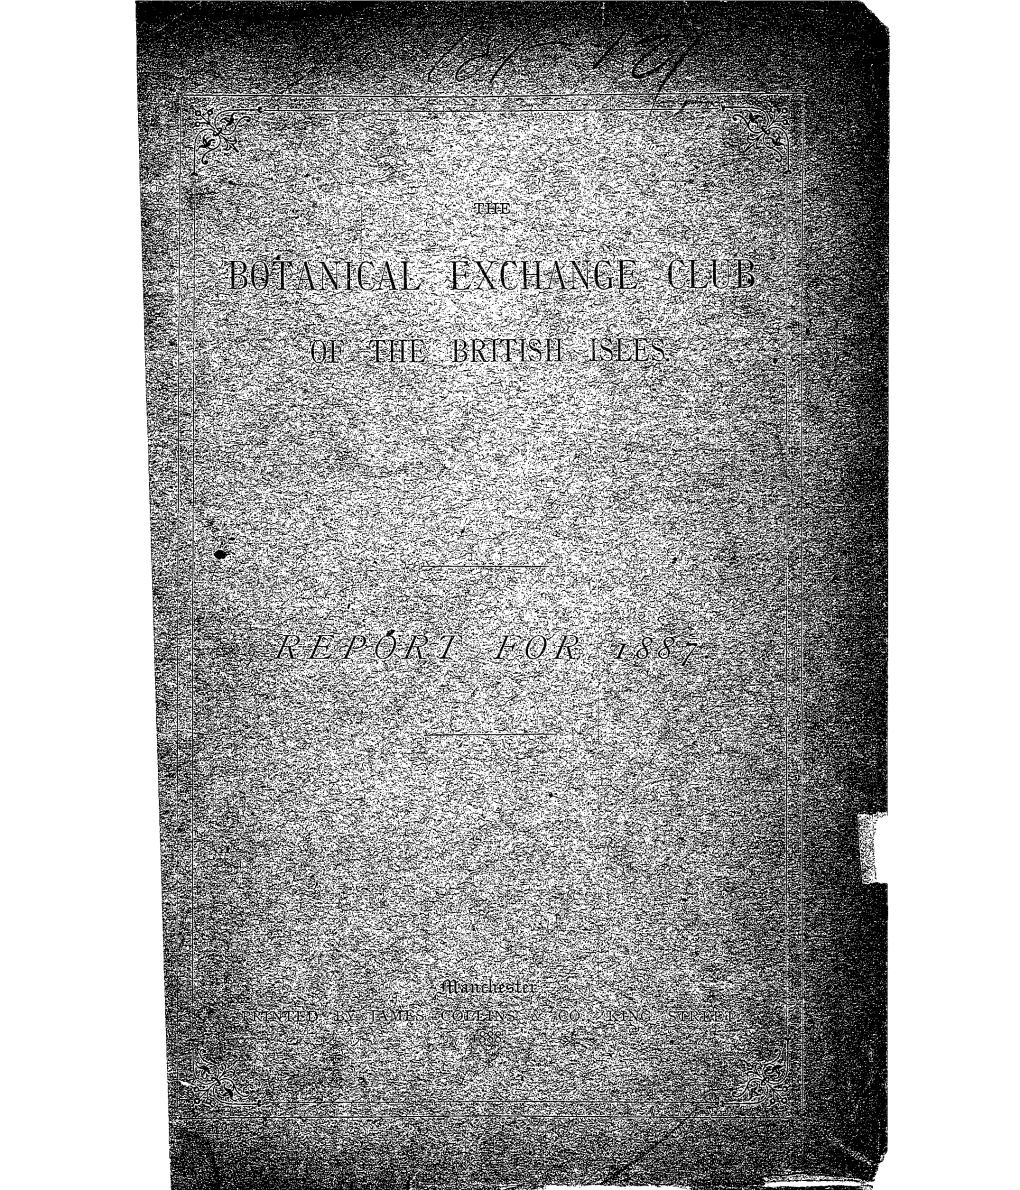 Botanical Exchange Club Report for 1887